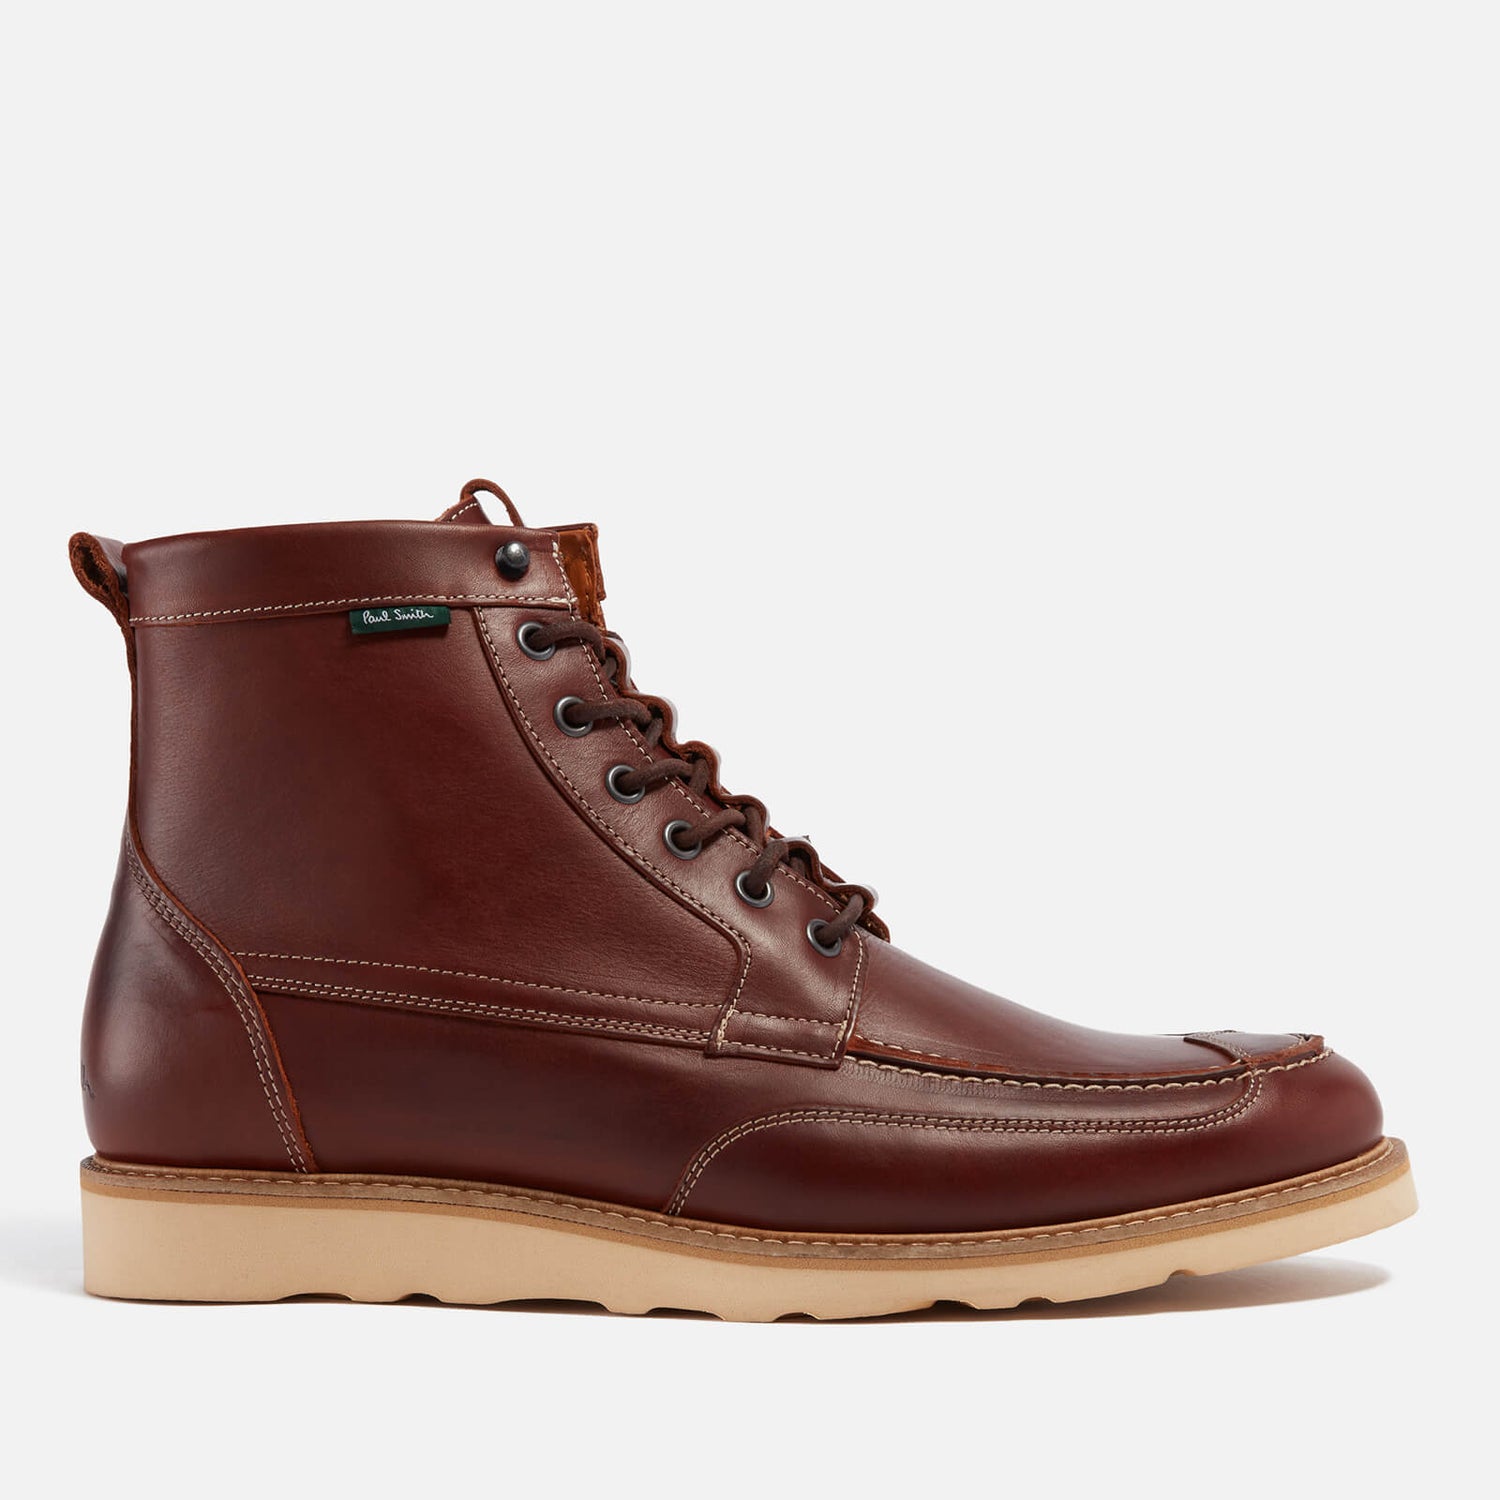 Paul Smith Tufnel Leather Boots